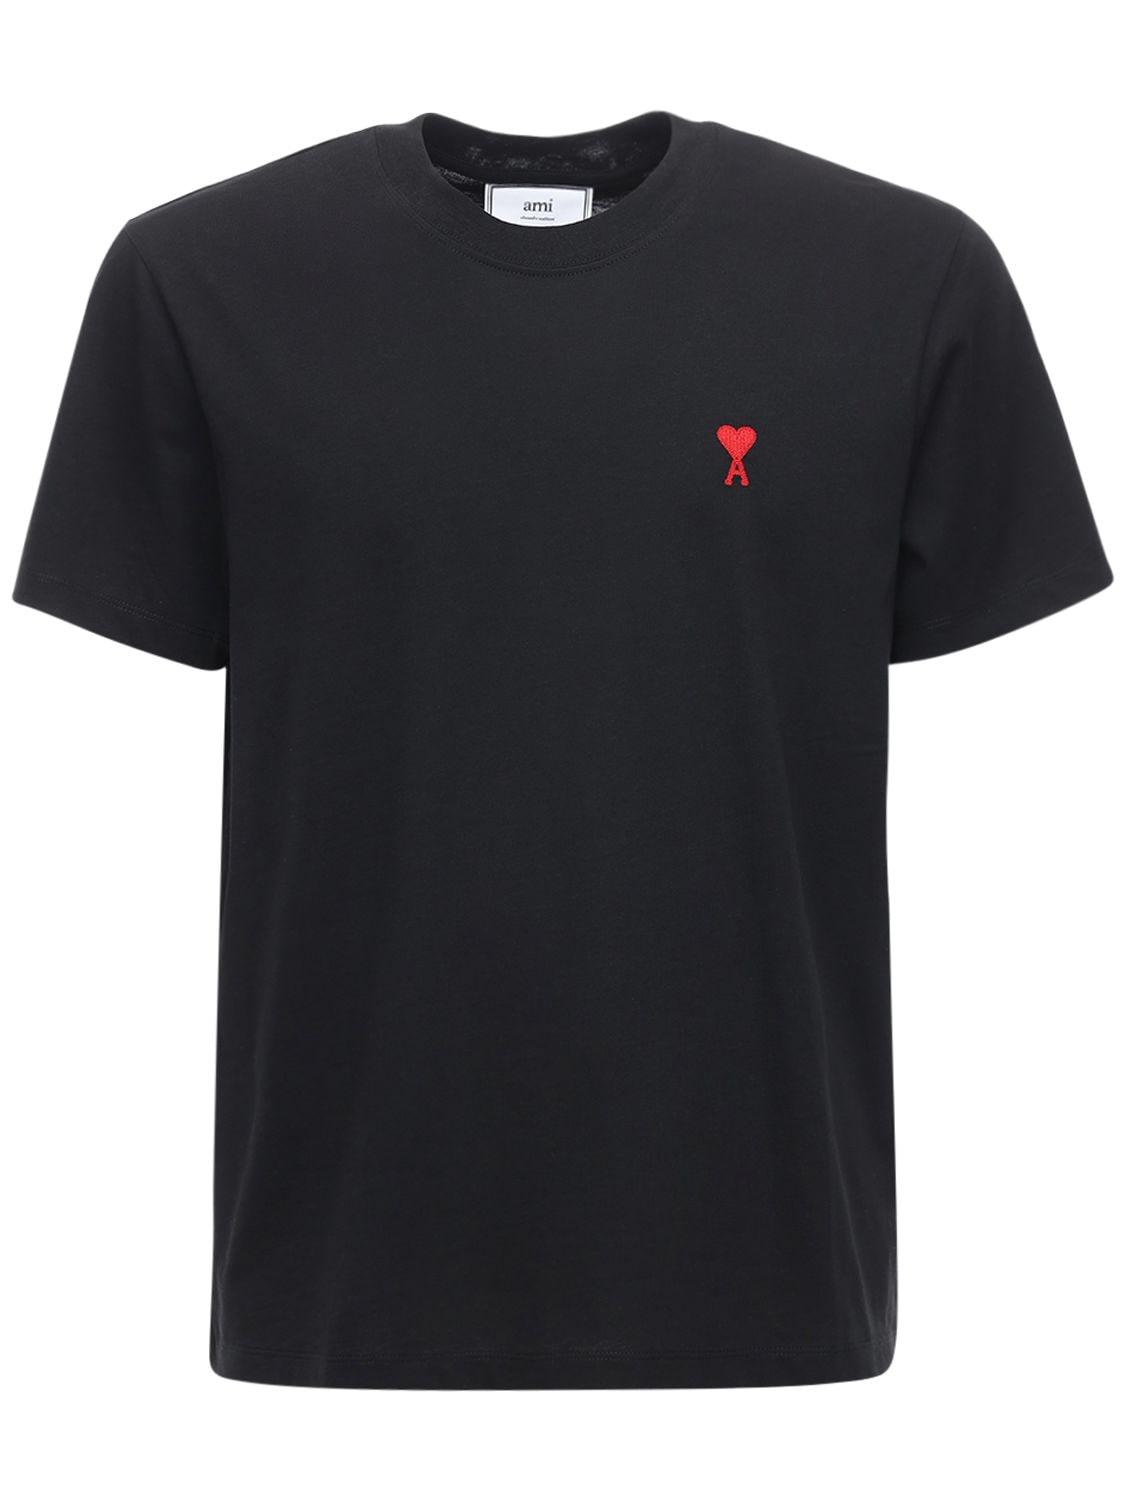 AMI Embroidered Logo Cotton Jersey T-shirt in Black for Men - Lyst